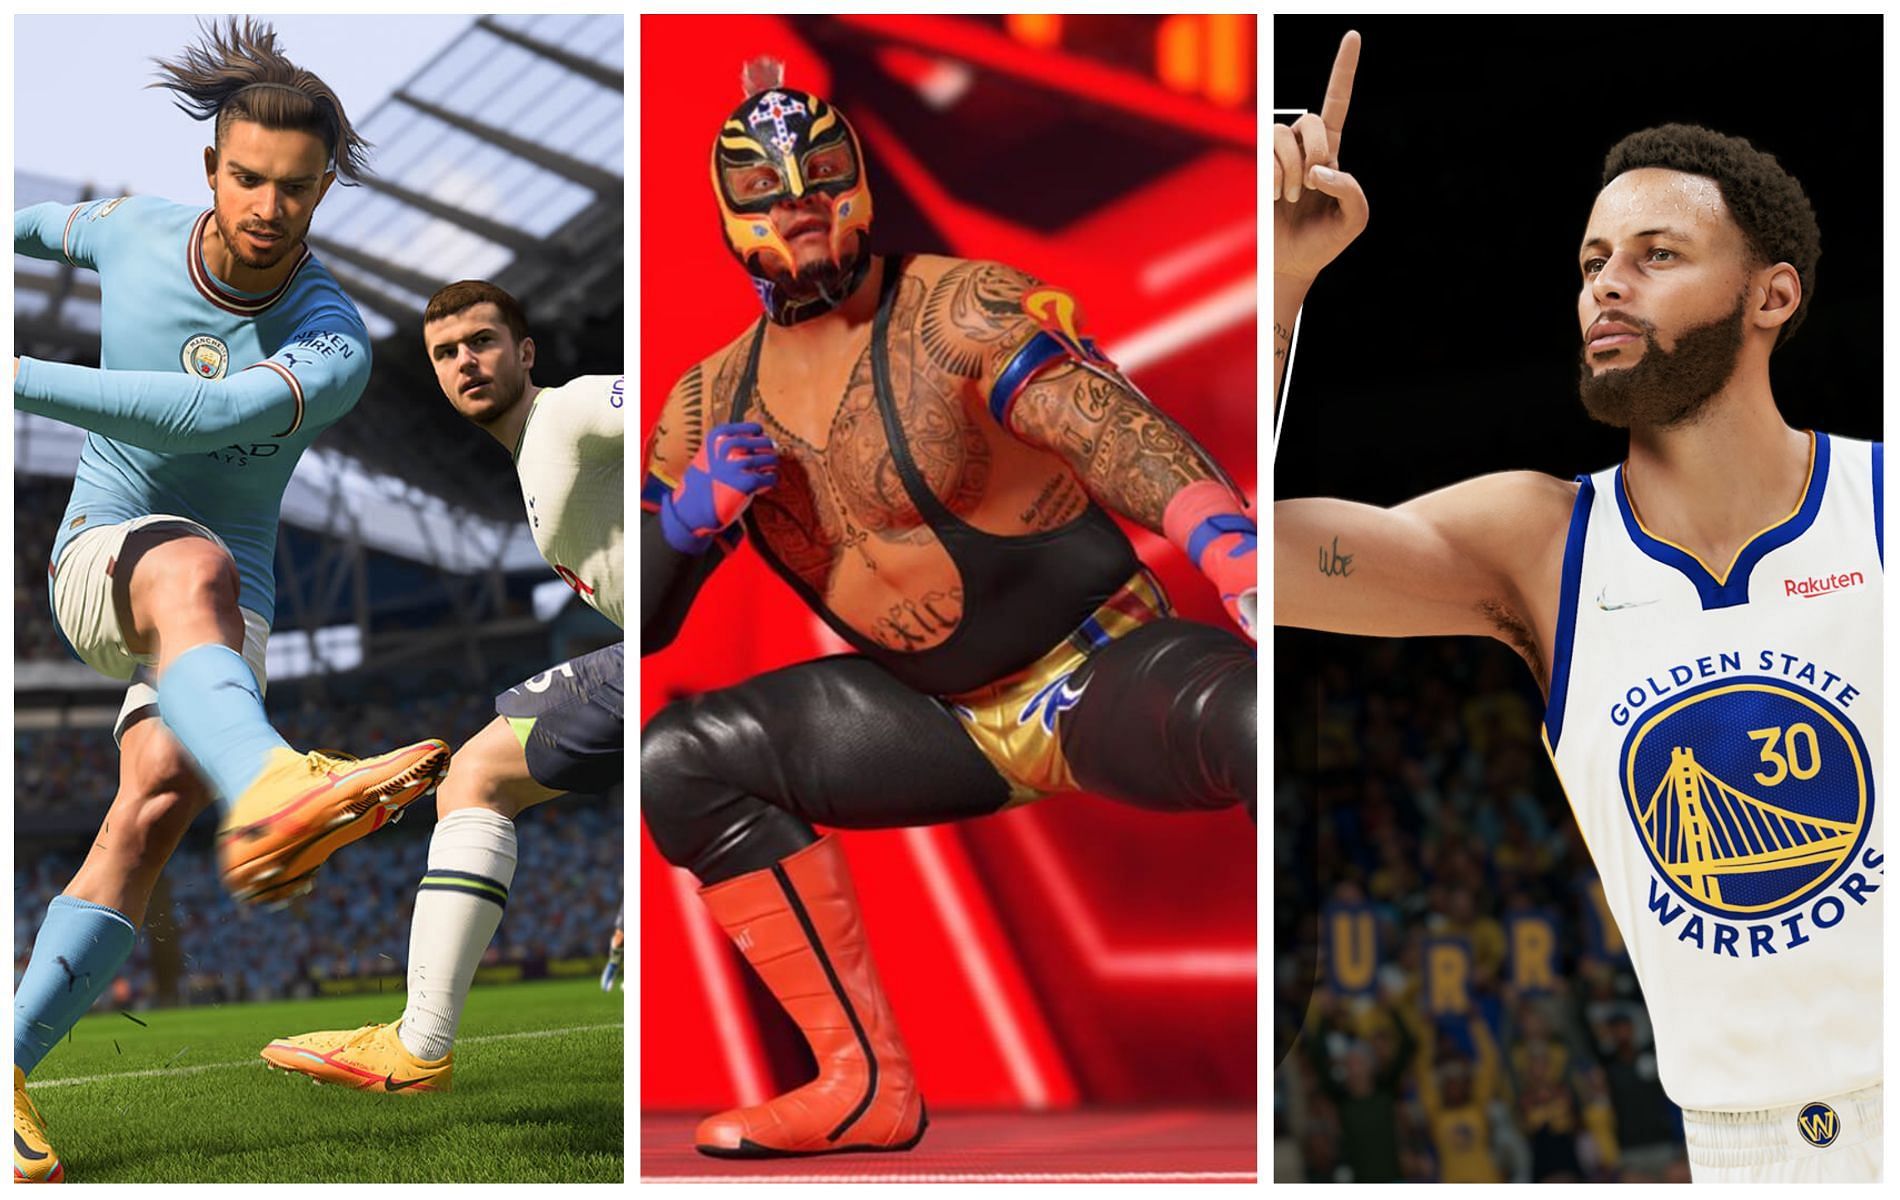 Sports games attract an international audience (Images via EA Sports and 2K)